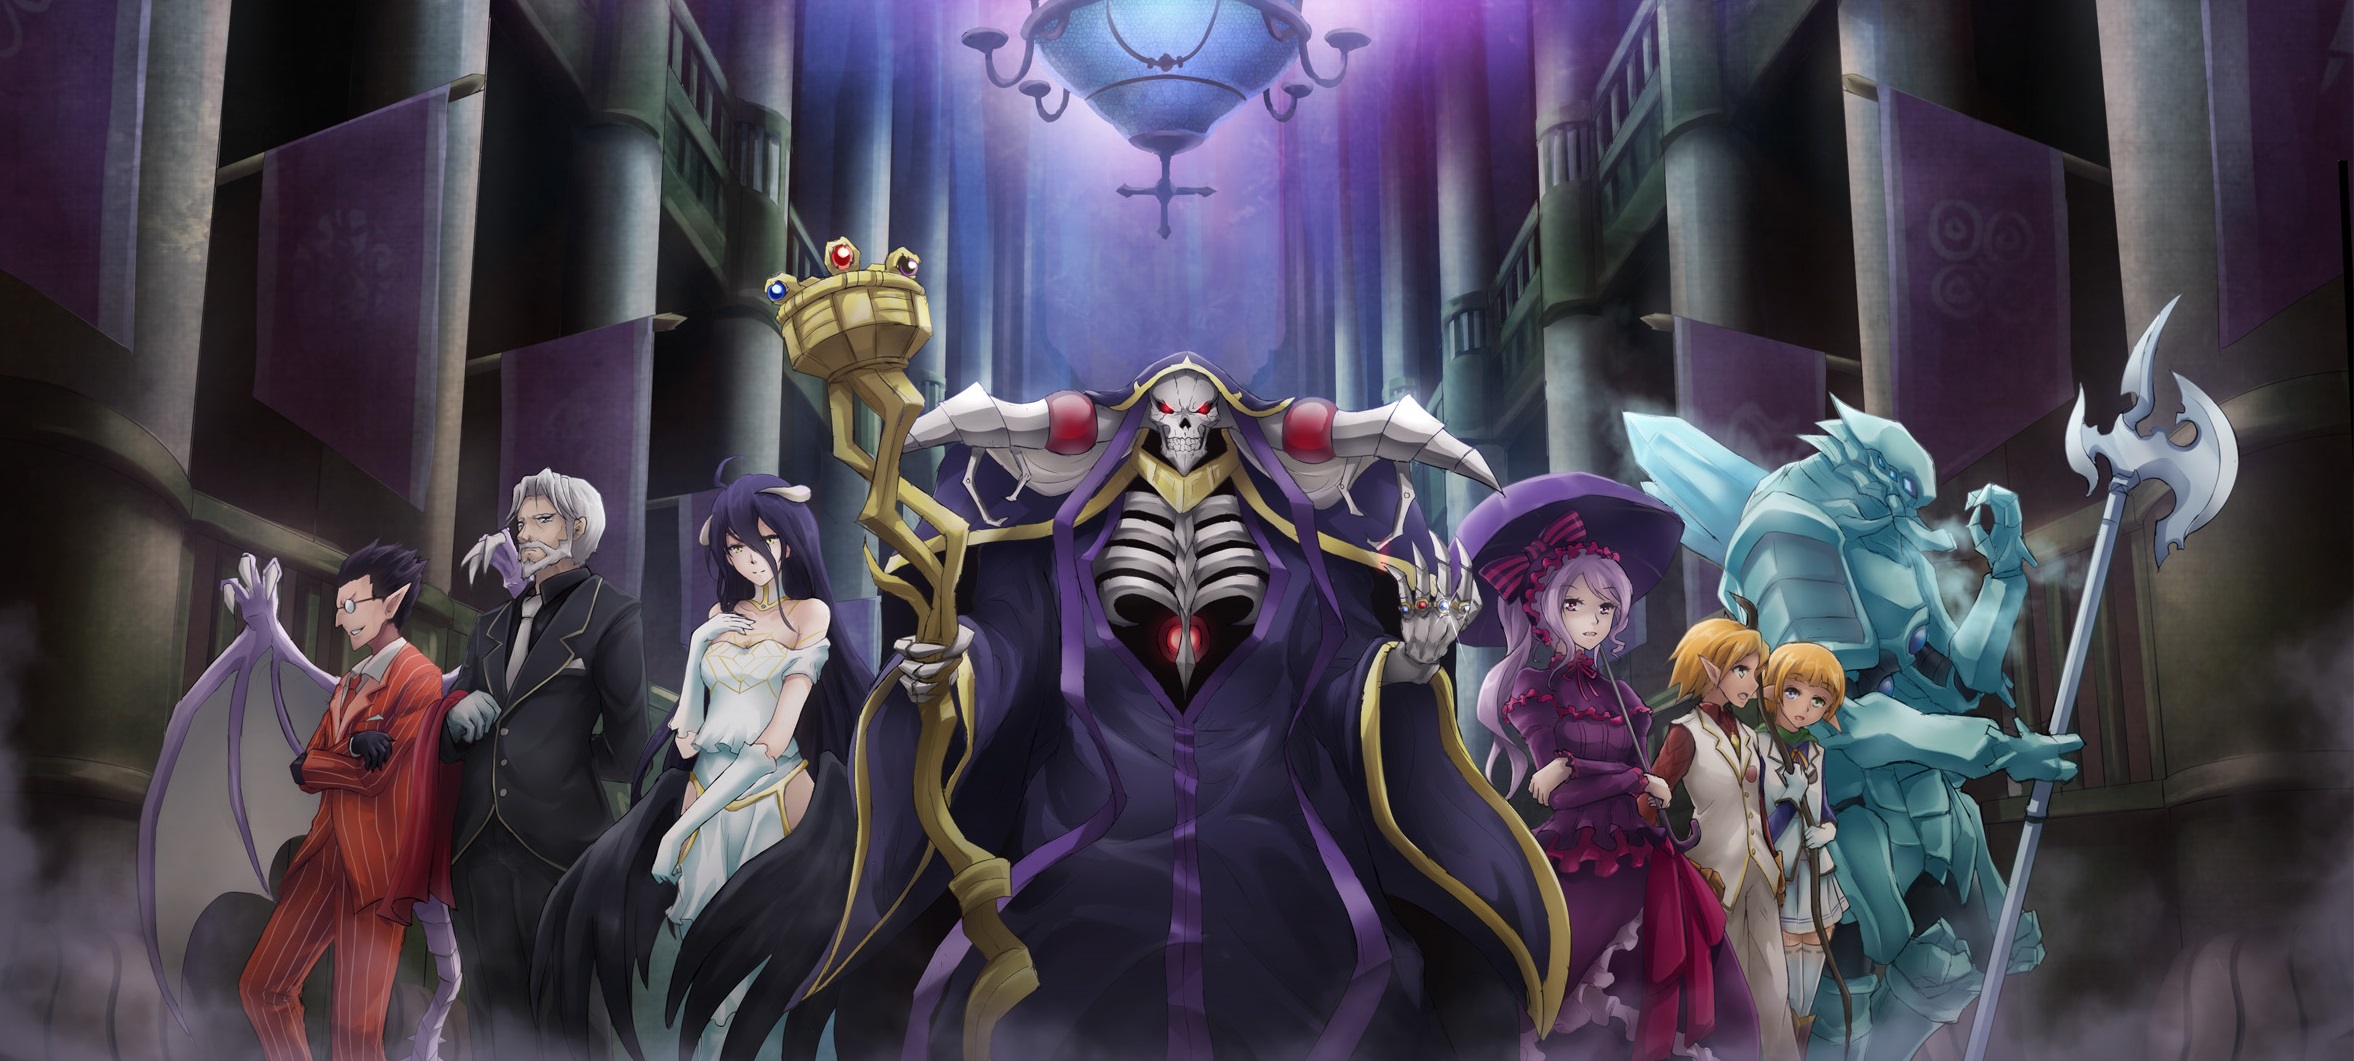 demiurge (overlord), cocytus (overlord), overlord, anime, ainz ooal gown, albedo (overlord), aura bella fiora, great tomb of nazarick, mare bello fiore, sebas tian, shalltear bloodfallen for android